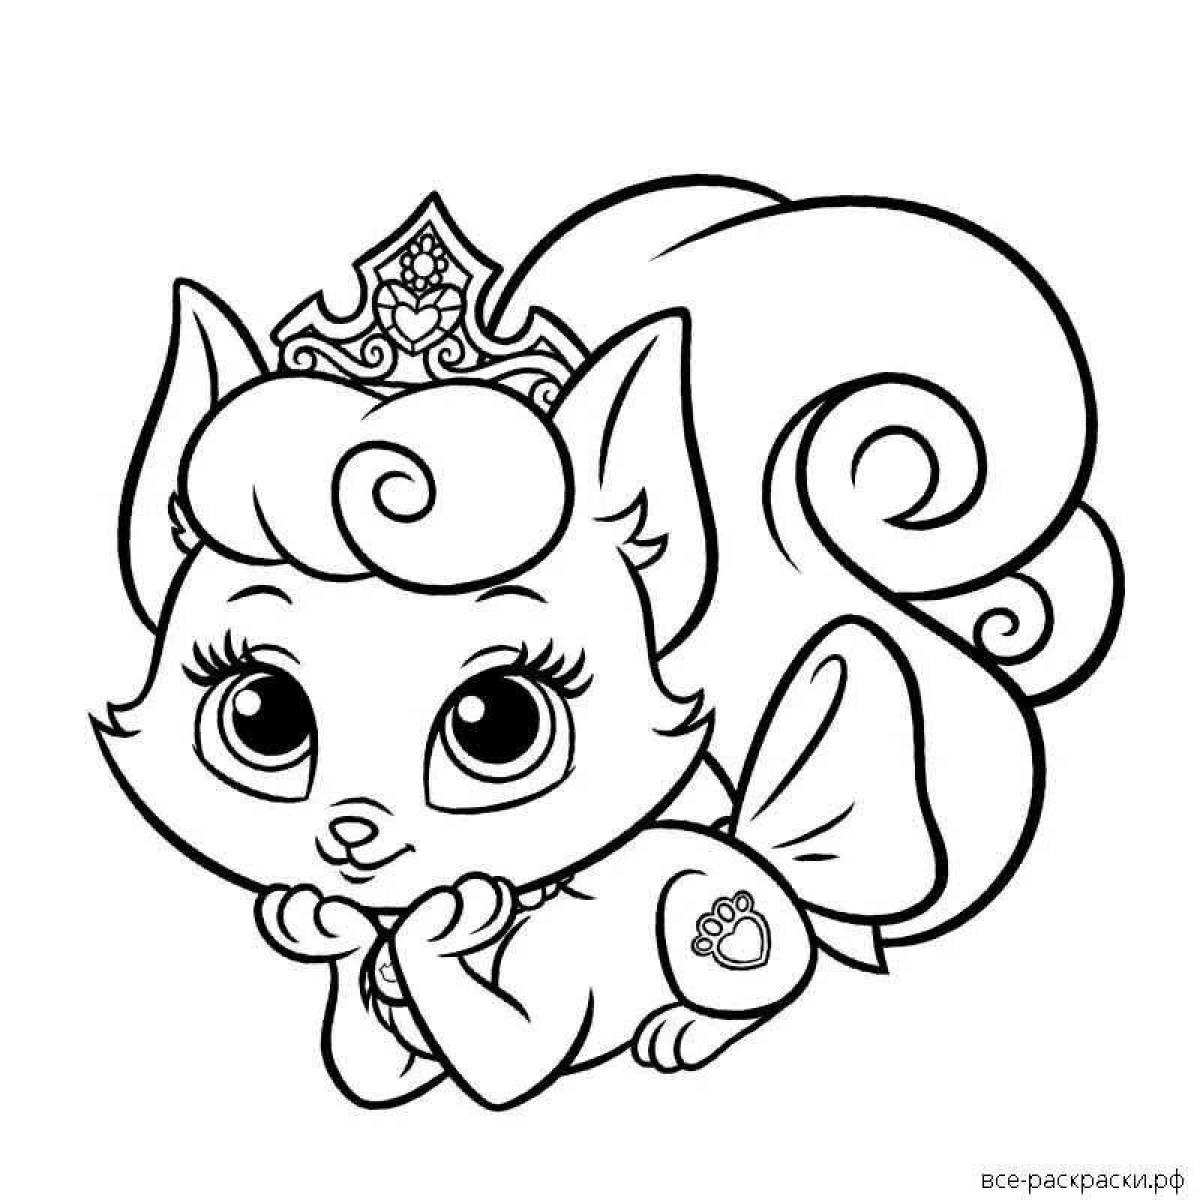 Exquisite cat queen coloring page